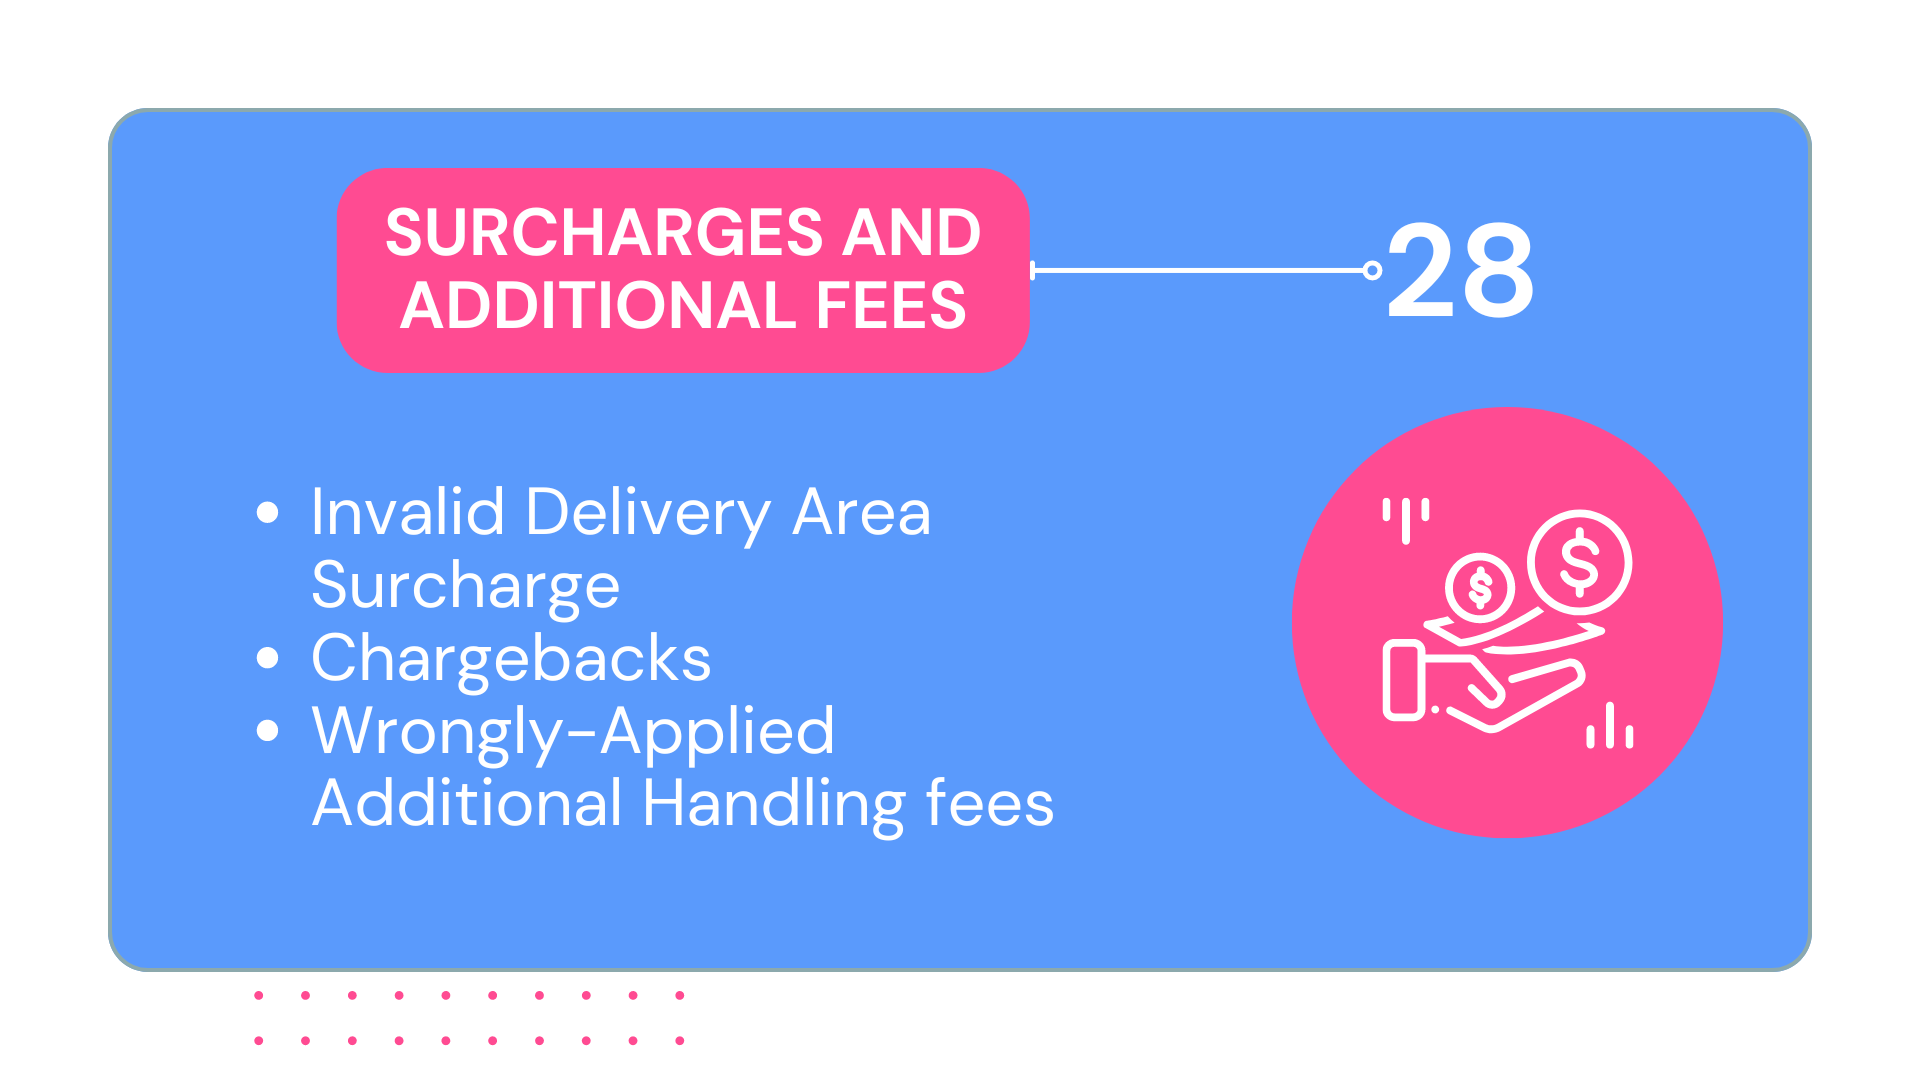 Surcharges and additional fees